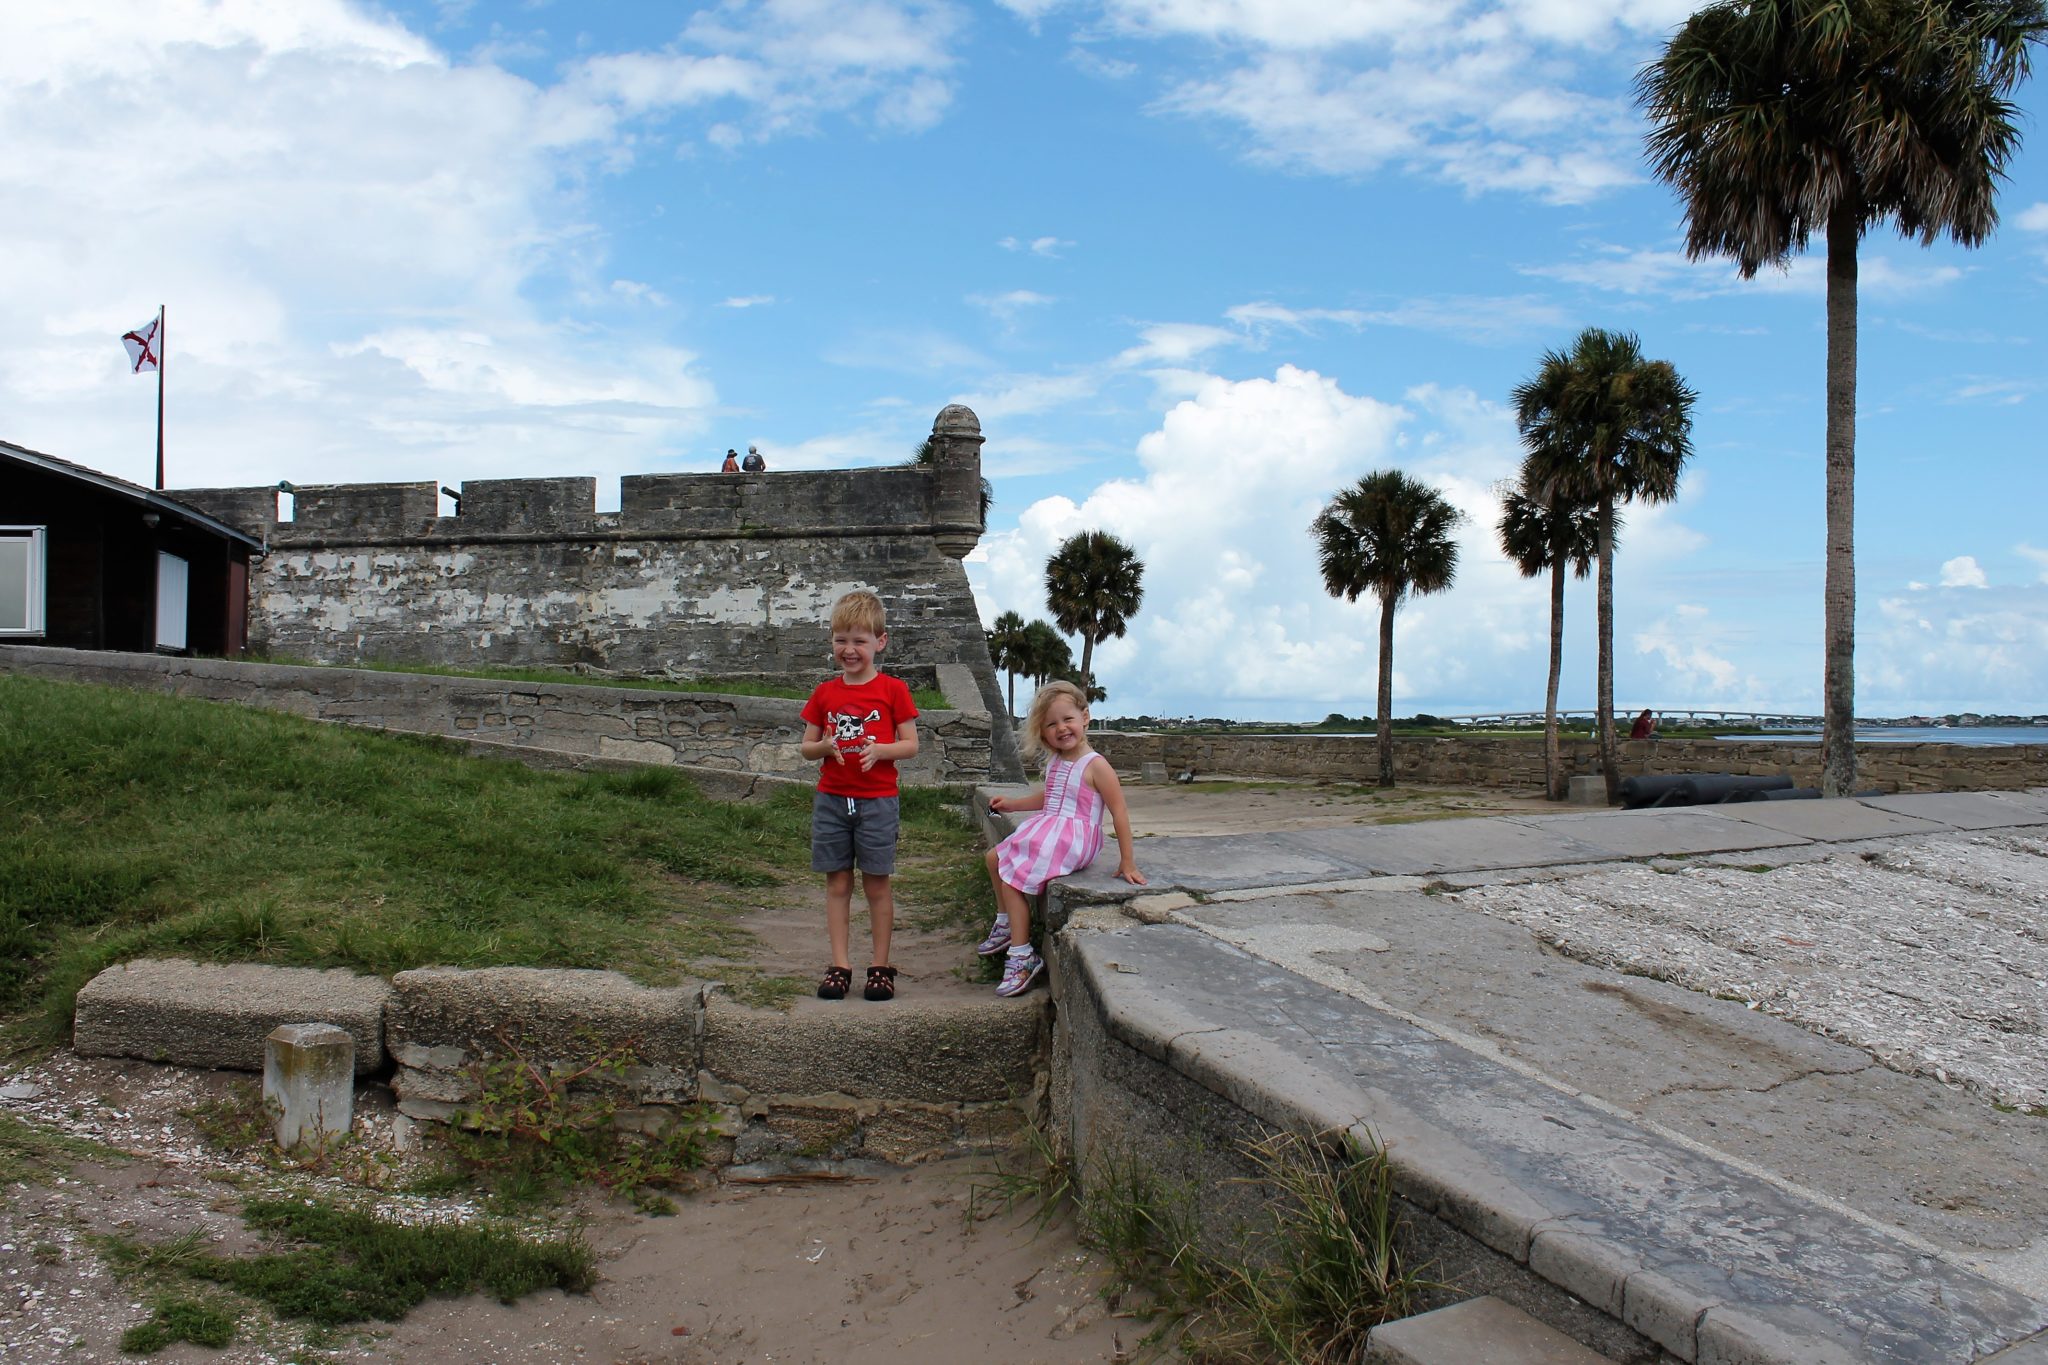 Our Favorite Things to Do and Eat in St. Augustine | sunshineandholly.com | Florida | family beach vacation | St. Augustine guide | what to do with kids in St. Augustine